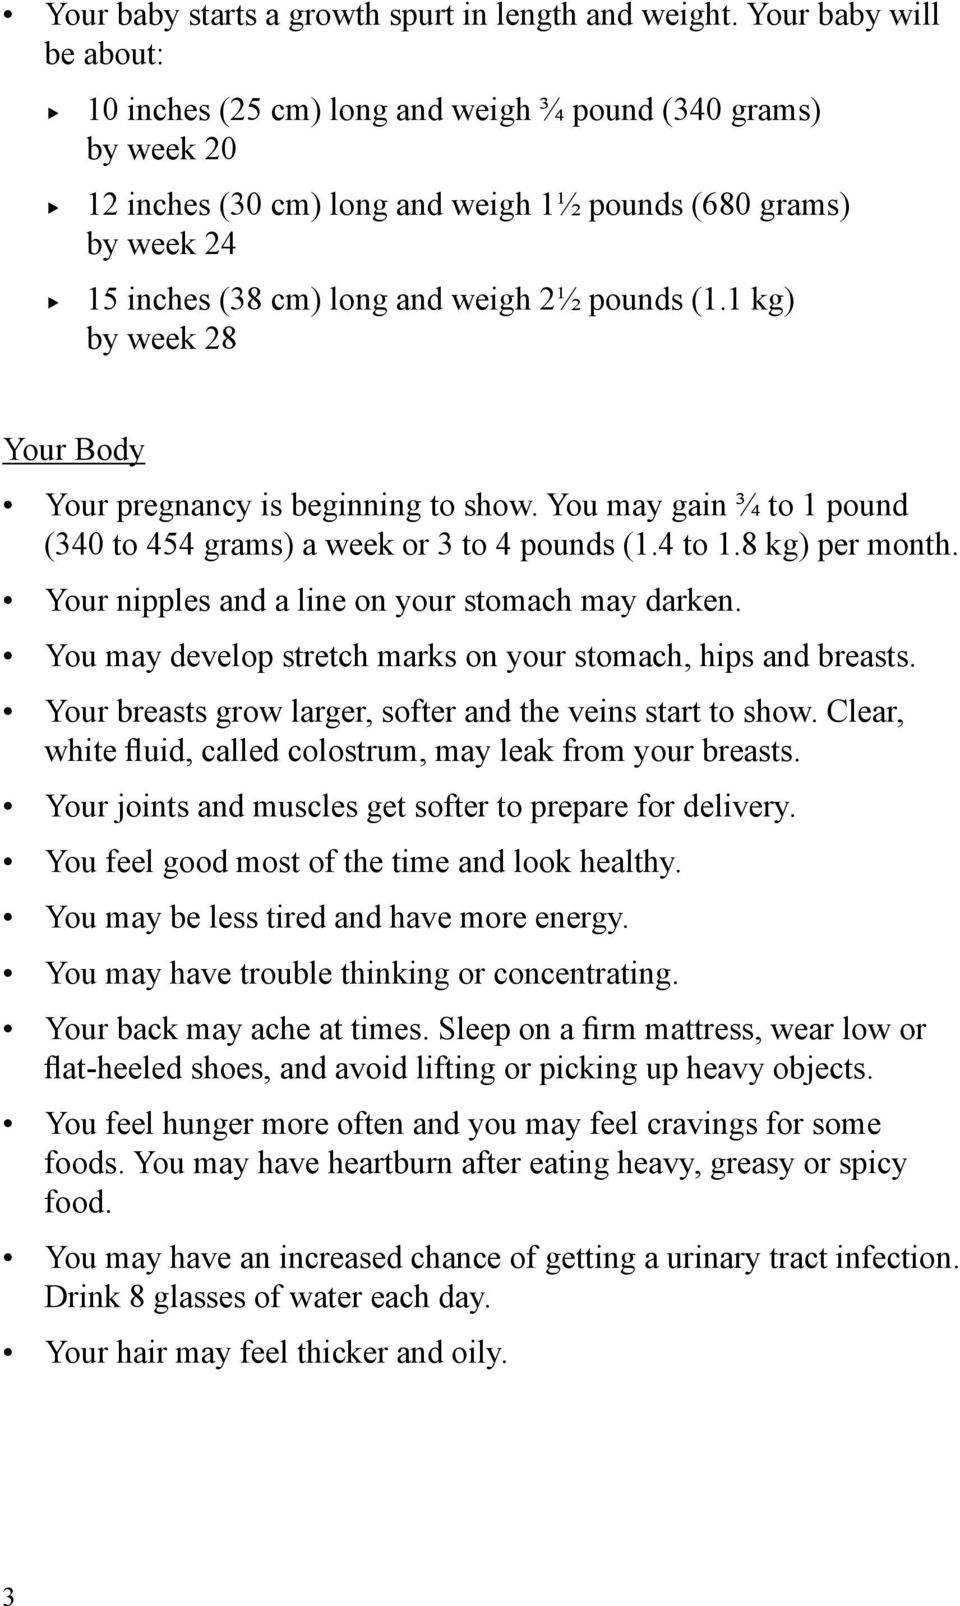 (1.1 kg) by week 28 Your Body Your pregnancy is beginning to show. You may gain ¾ to 1 pound (340 to 454 grams) a week or 3 to 4 pounds (1.4 to 1.8 kg) per month.